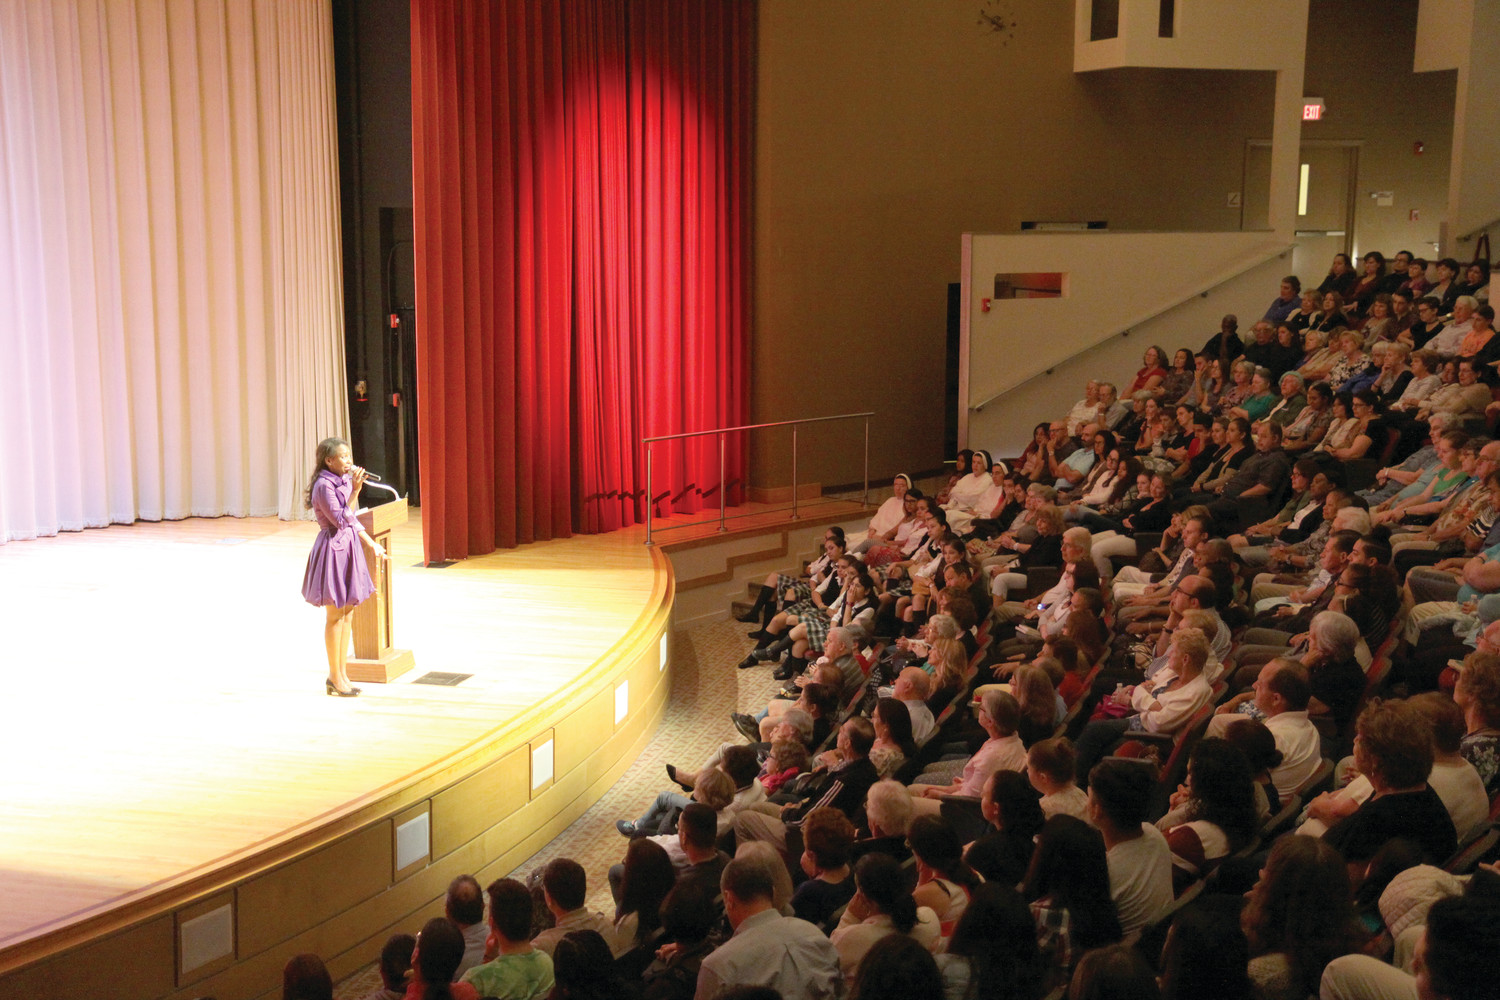 Immaculée Ilibagiza, a Rwandan genocide survivor and author of the New York Times best-seller “Left to Tell: Discovering God Amidst the Rwandan Holocaust,” addressed a crowd at McVinney Auditorium on Tuesday, October 10. “It is truly by the grace of God that I’m standing here,” she told those gathered to hear her witness of reconciliation and faith.